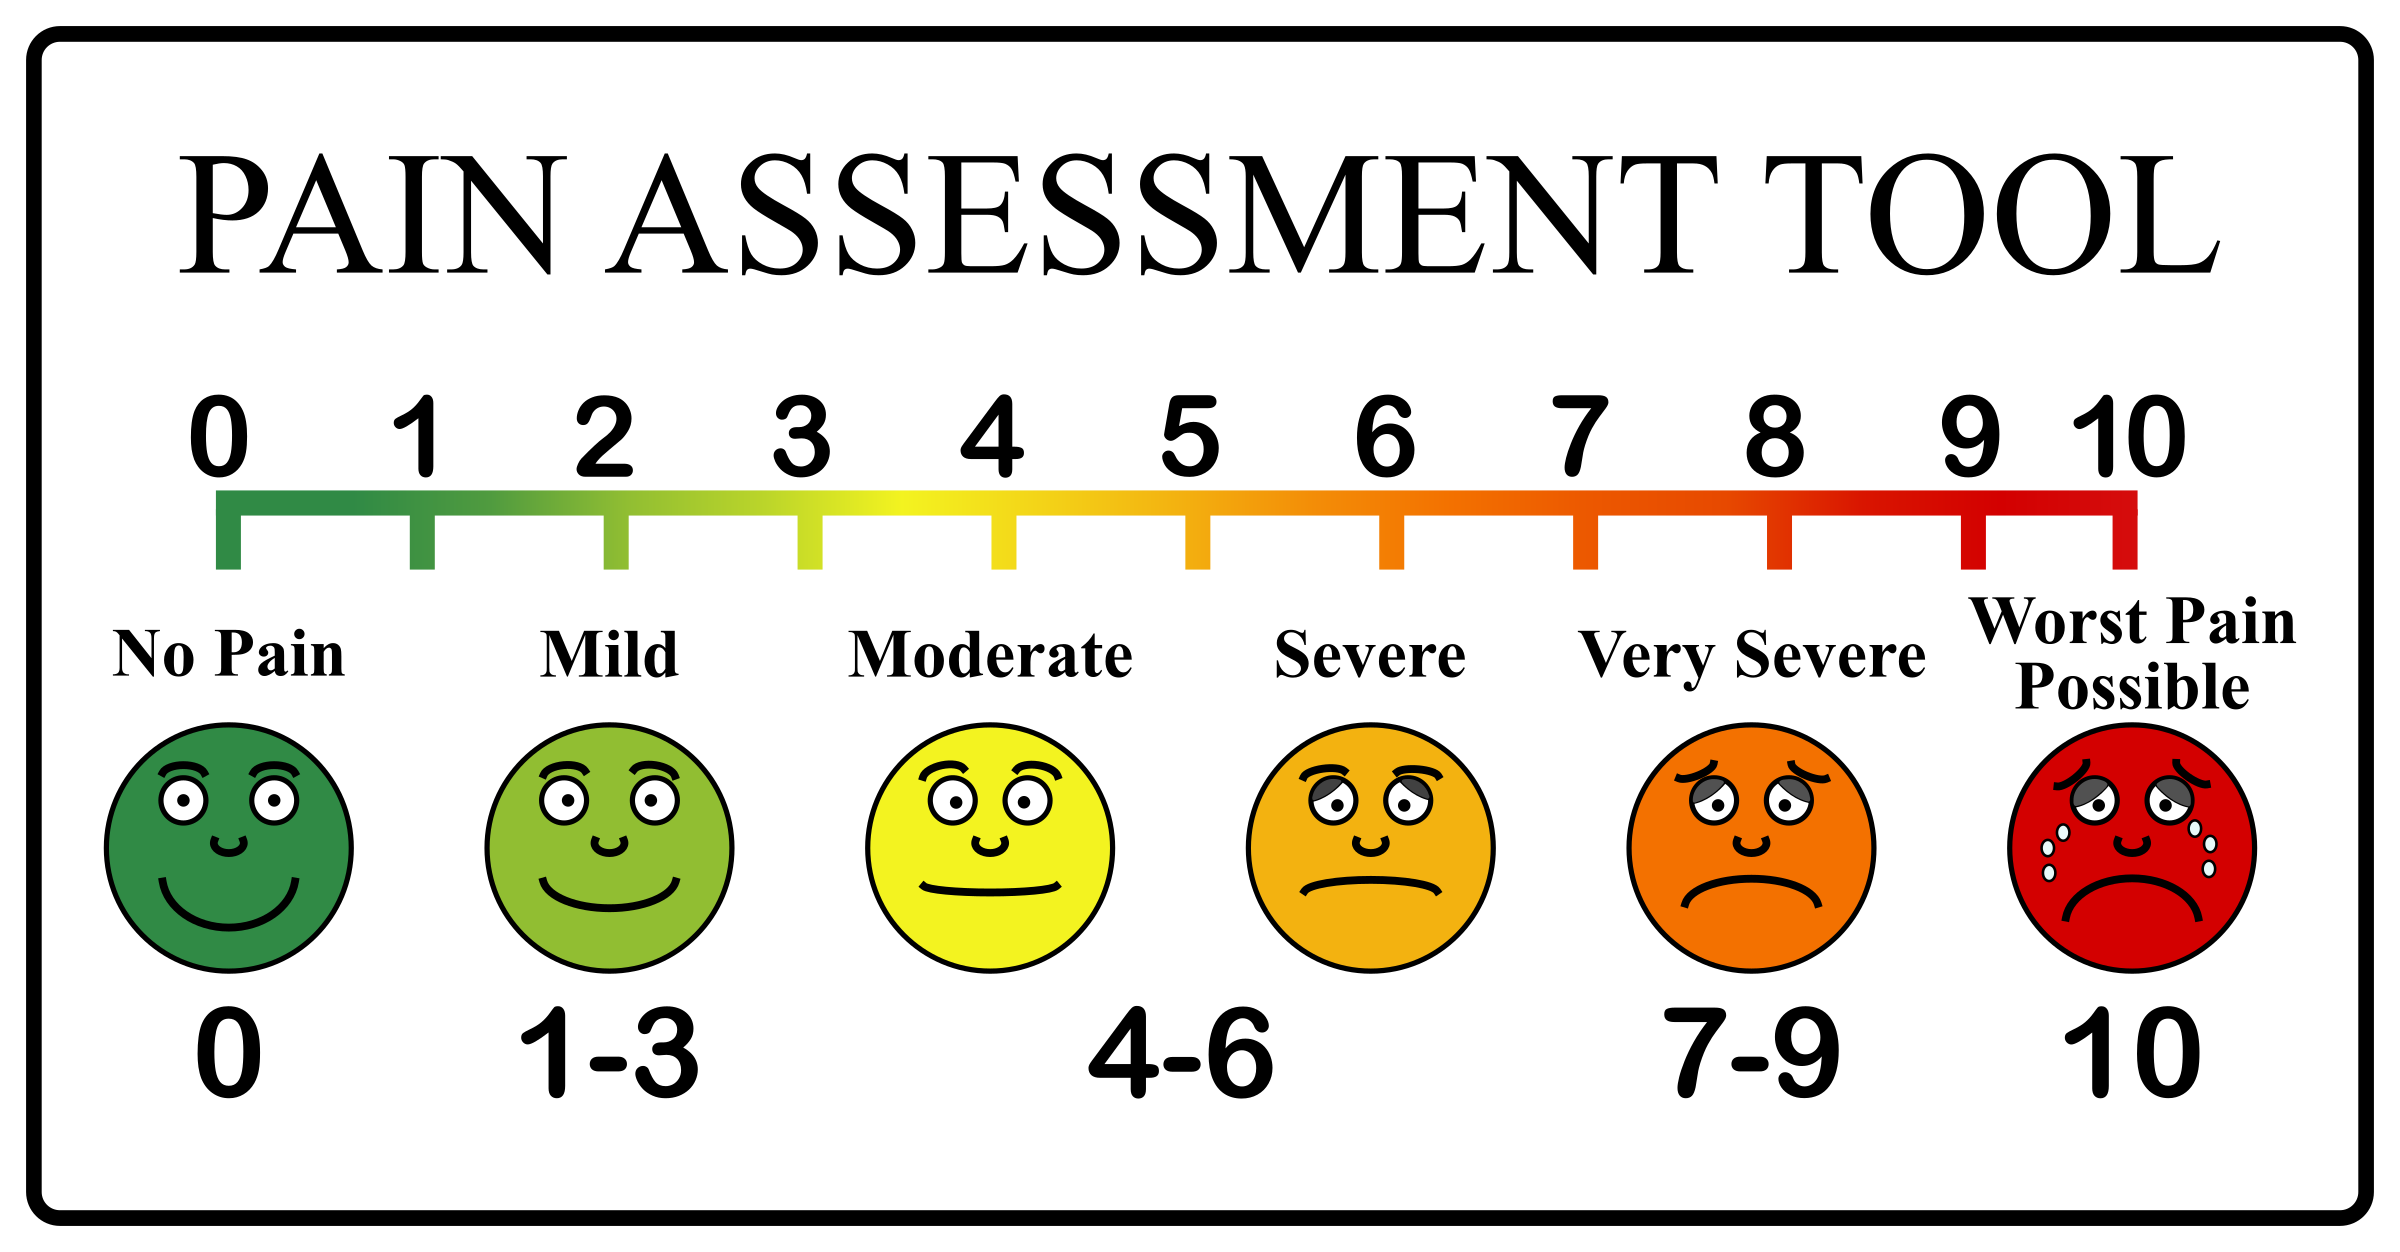 Pain scale. Medical clipart medical screening